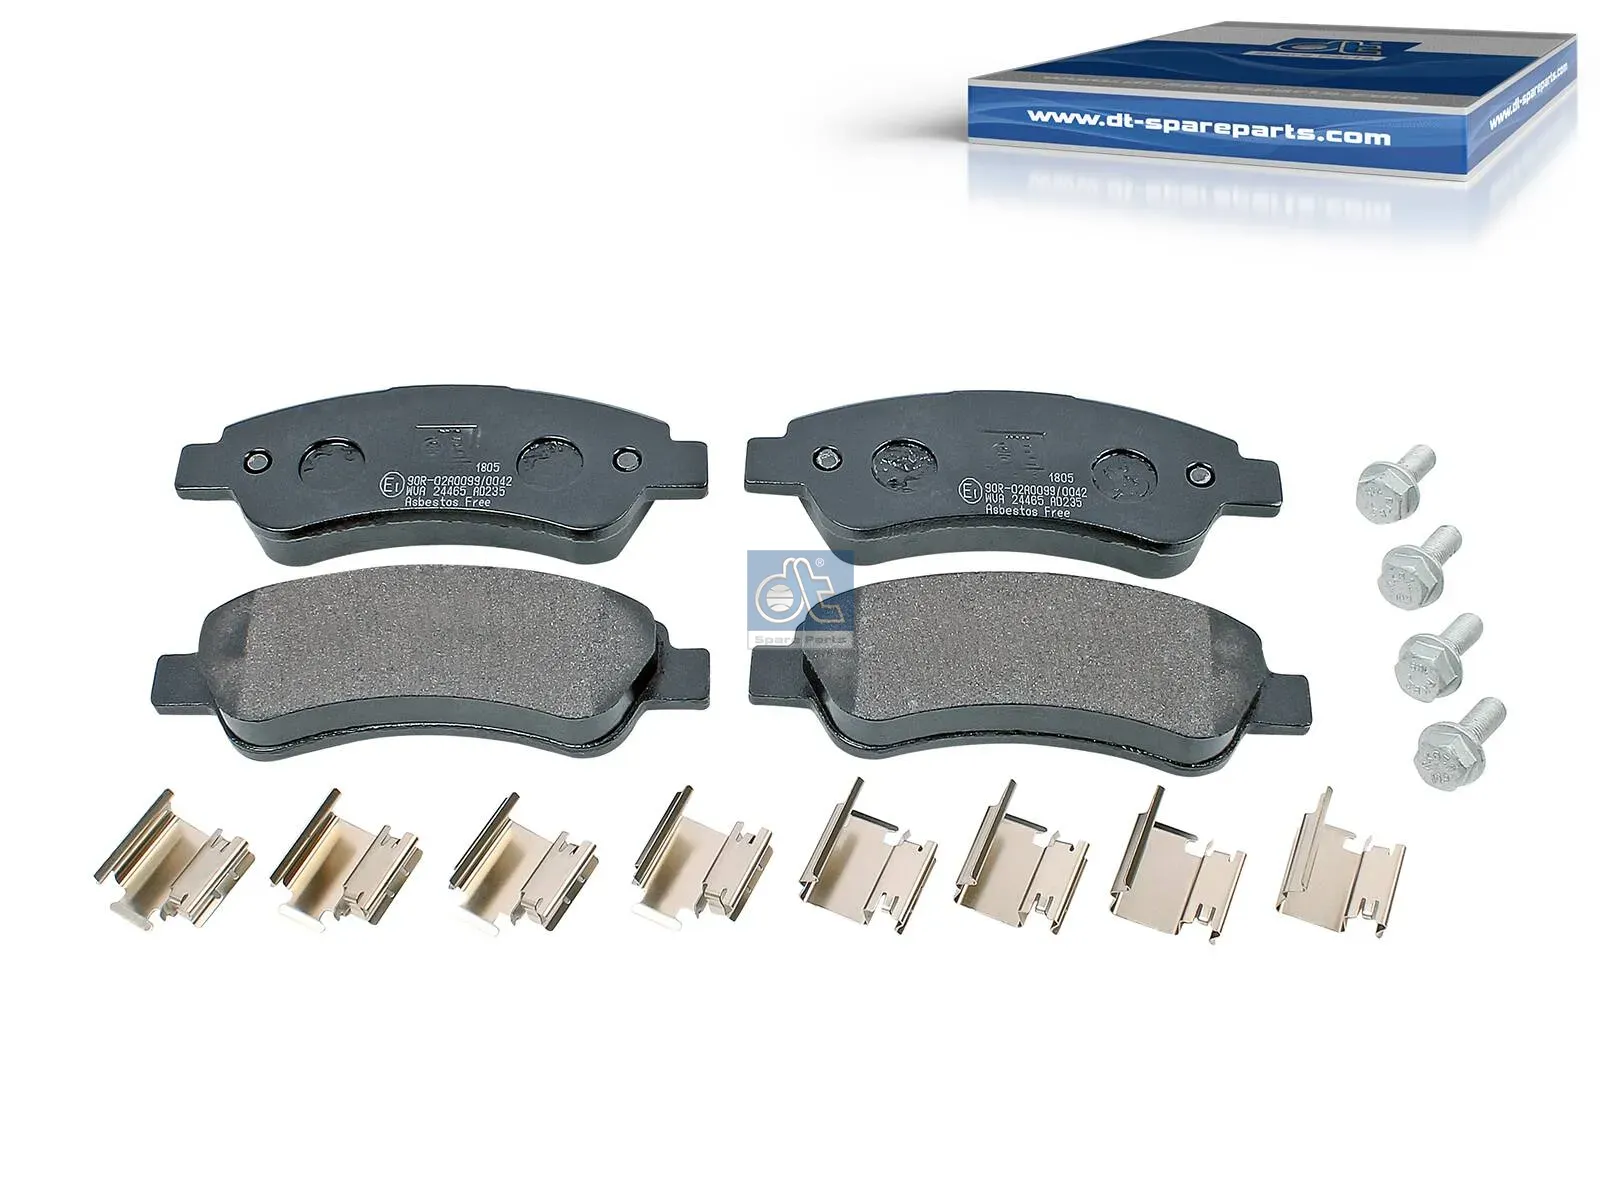 Disc brake pad kit, with accessory kit